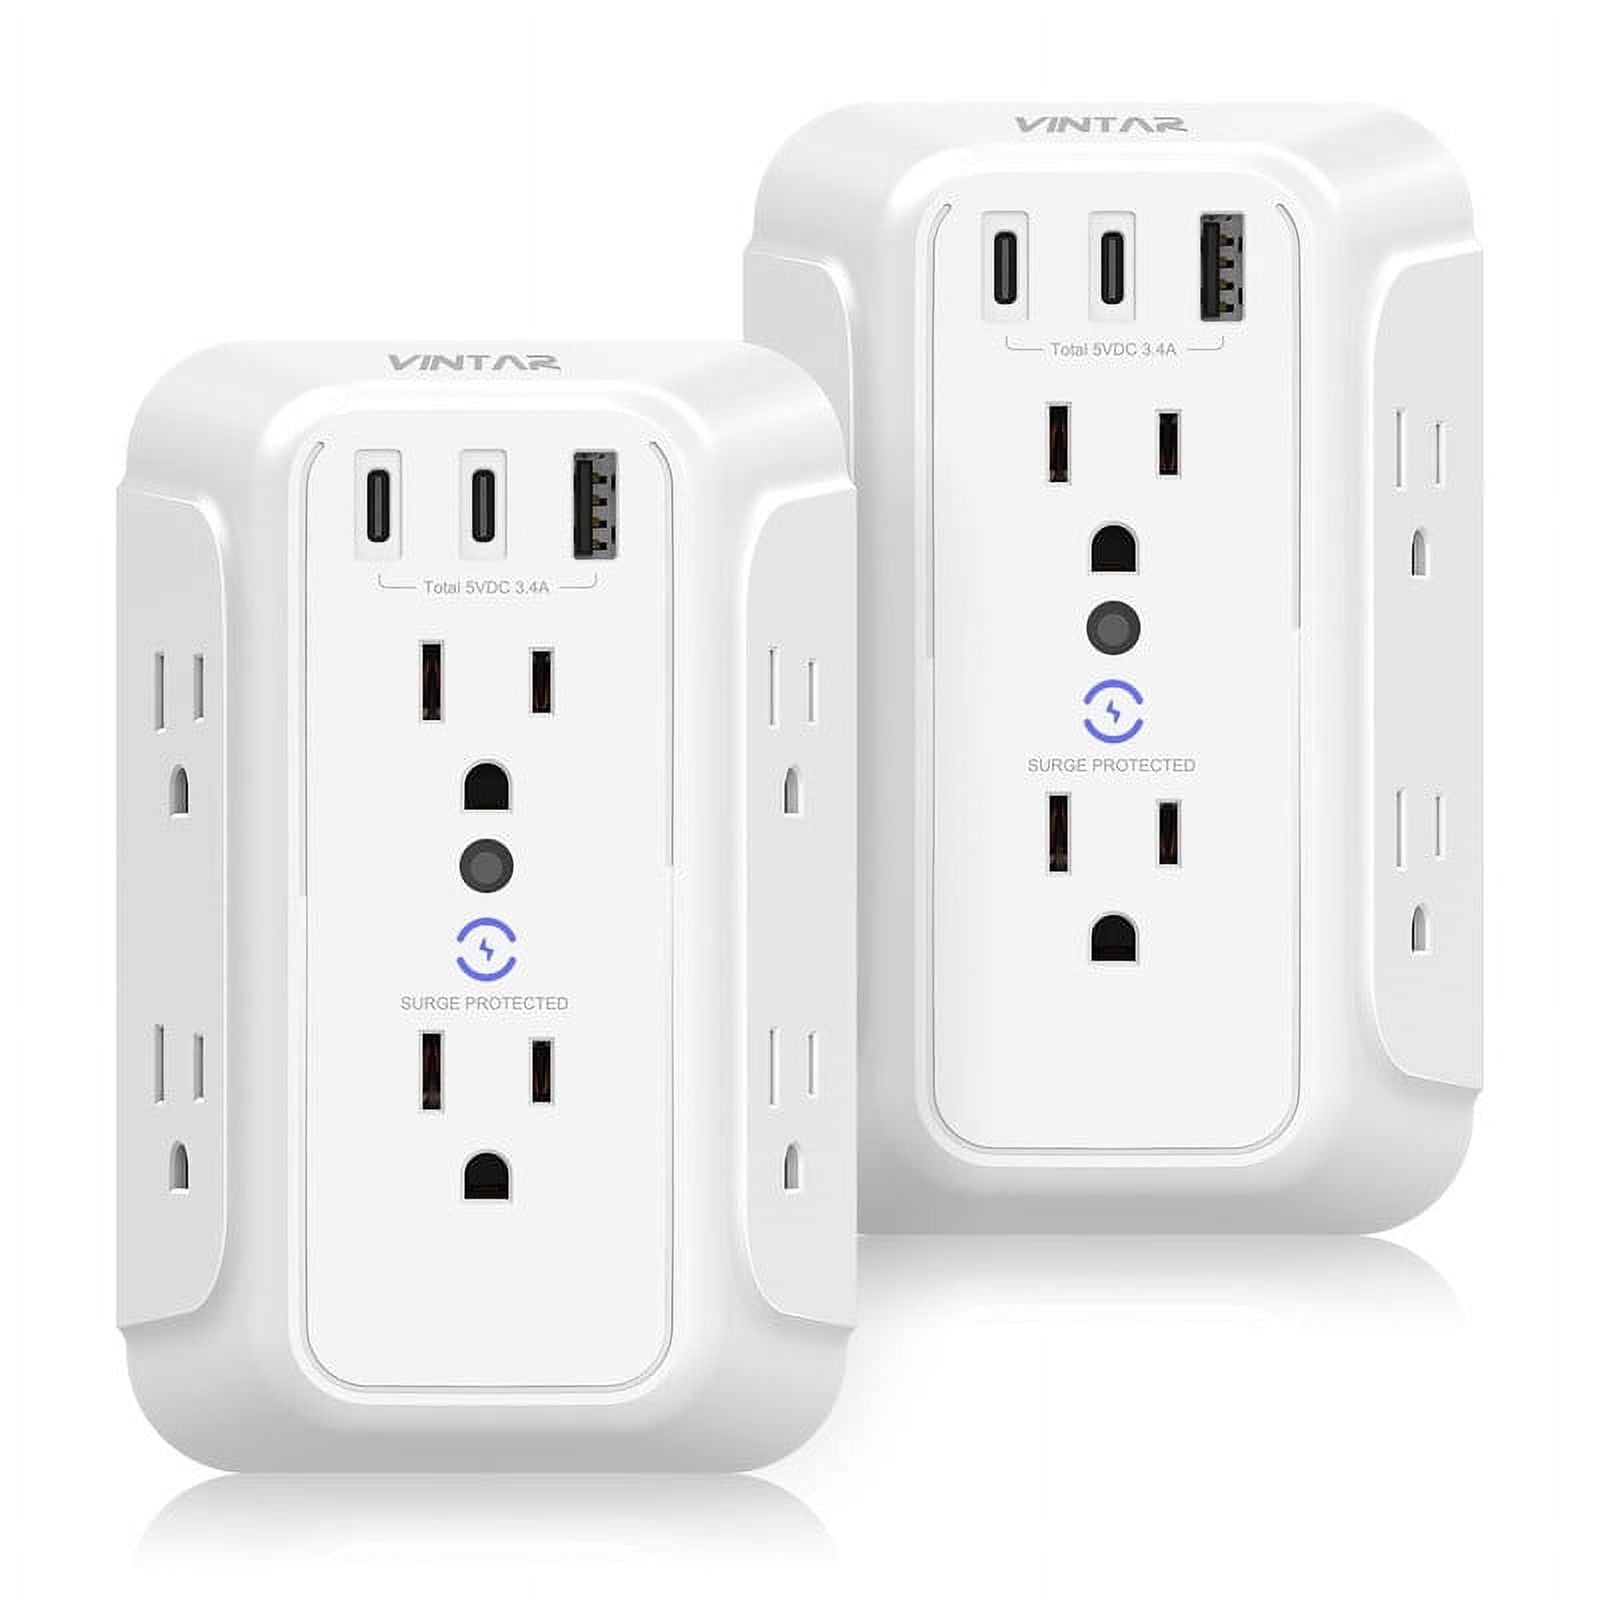 BN-LINK Multi Plug Outlet Extender with USB C, 3 Outlets Surge Protector with Type C Port Power Outlet Splitter Wall Plug 600J Charging Adapter for